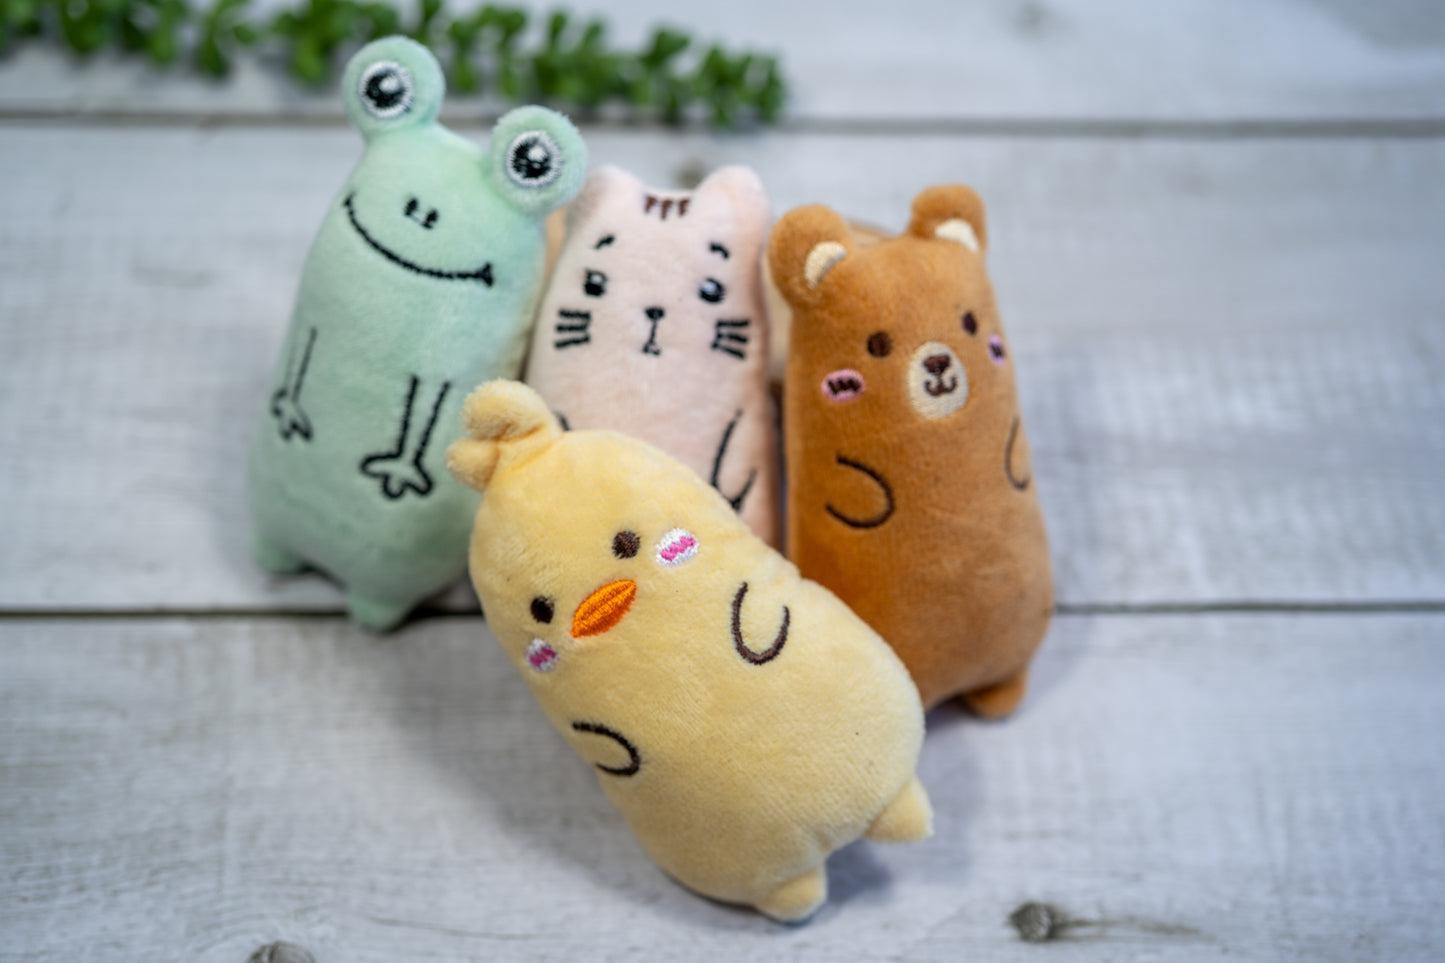 Set of 4 plush catnip toys in pastel colors for cats.